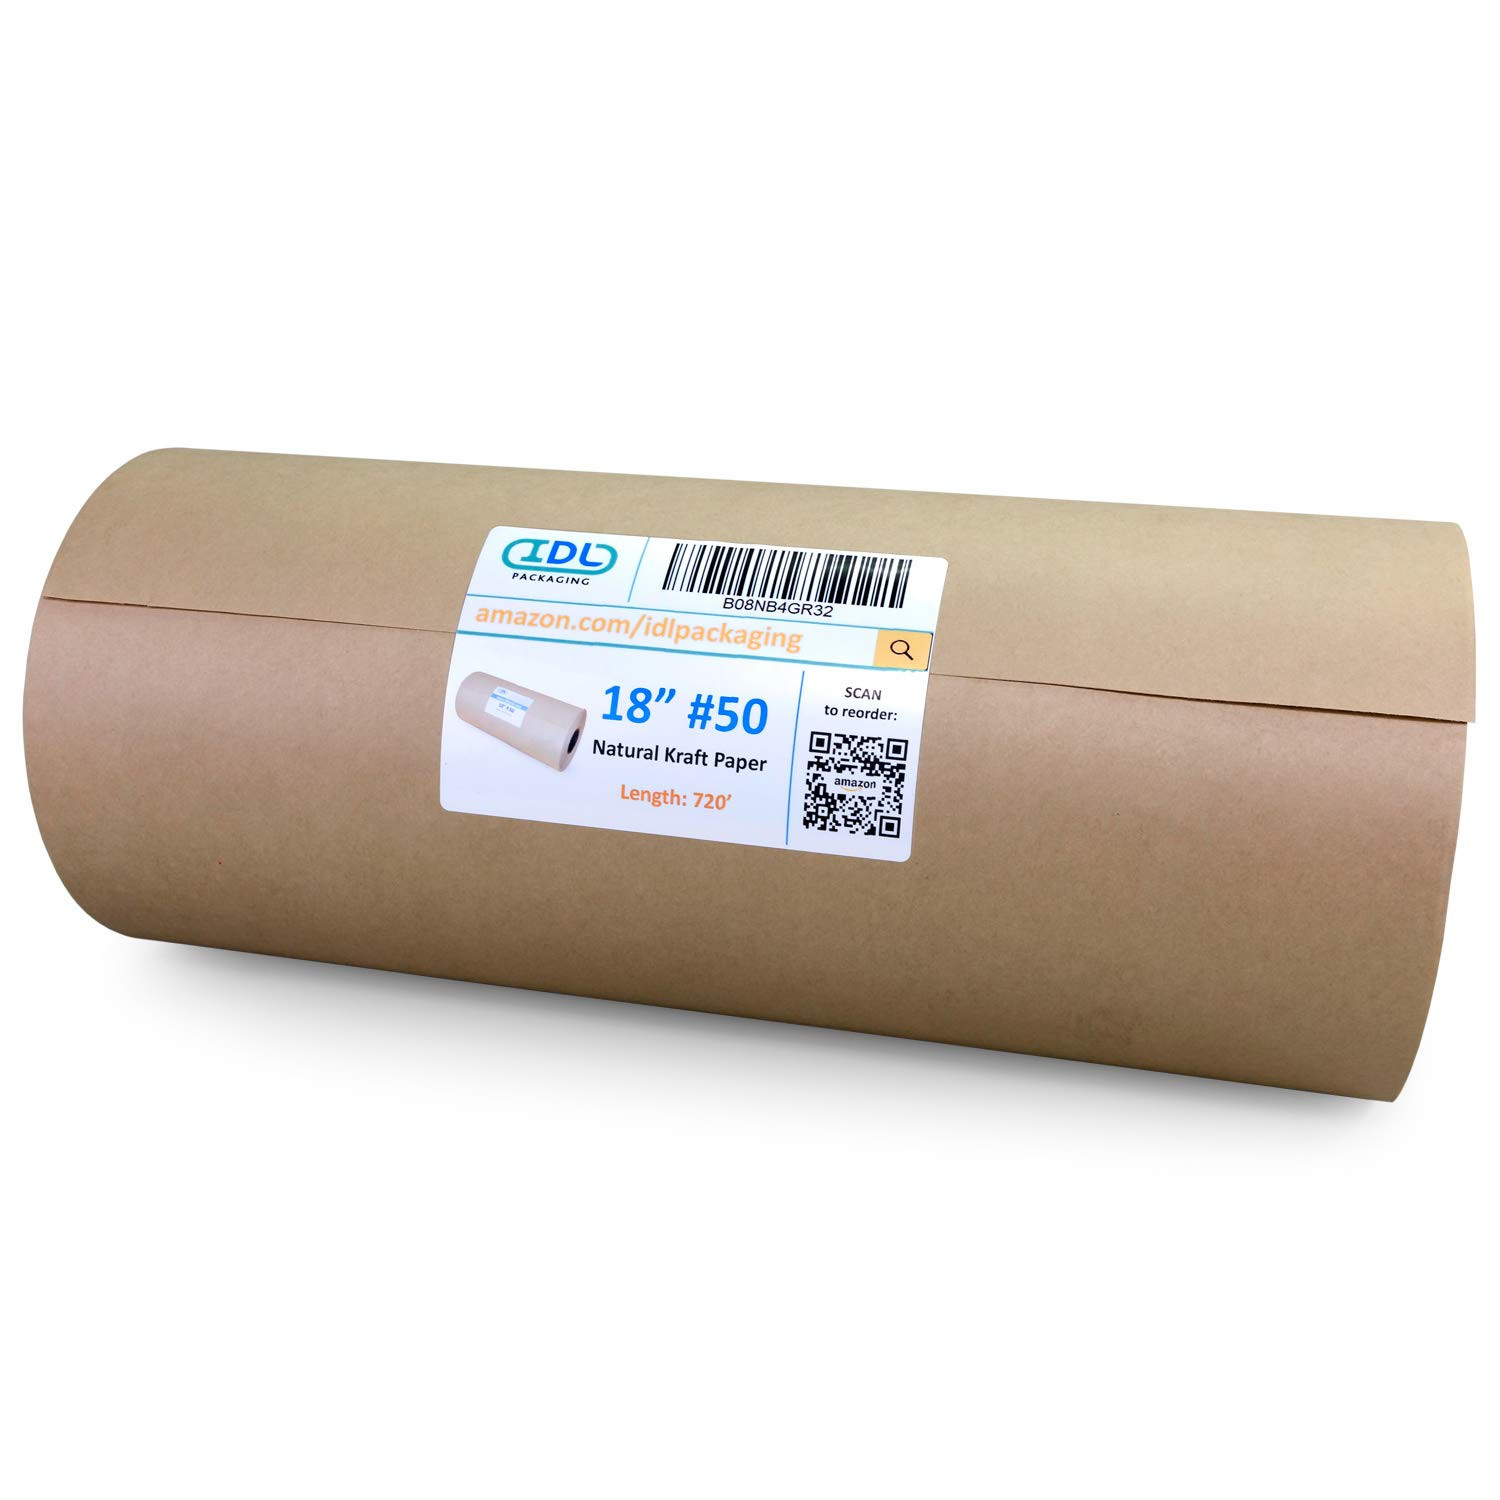 20 x 30 10 lb KRAFT RECYCLED BROWN TISSUE PAPER 480 count, — Treecycle  Recycled Paper Biodegradable Food Service